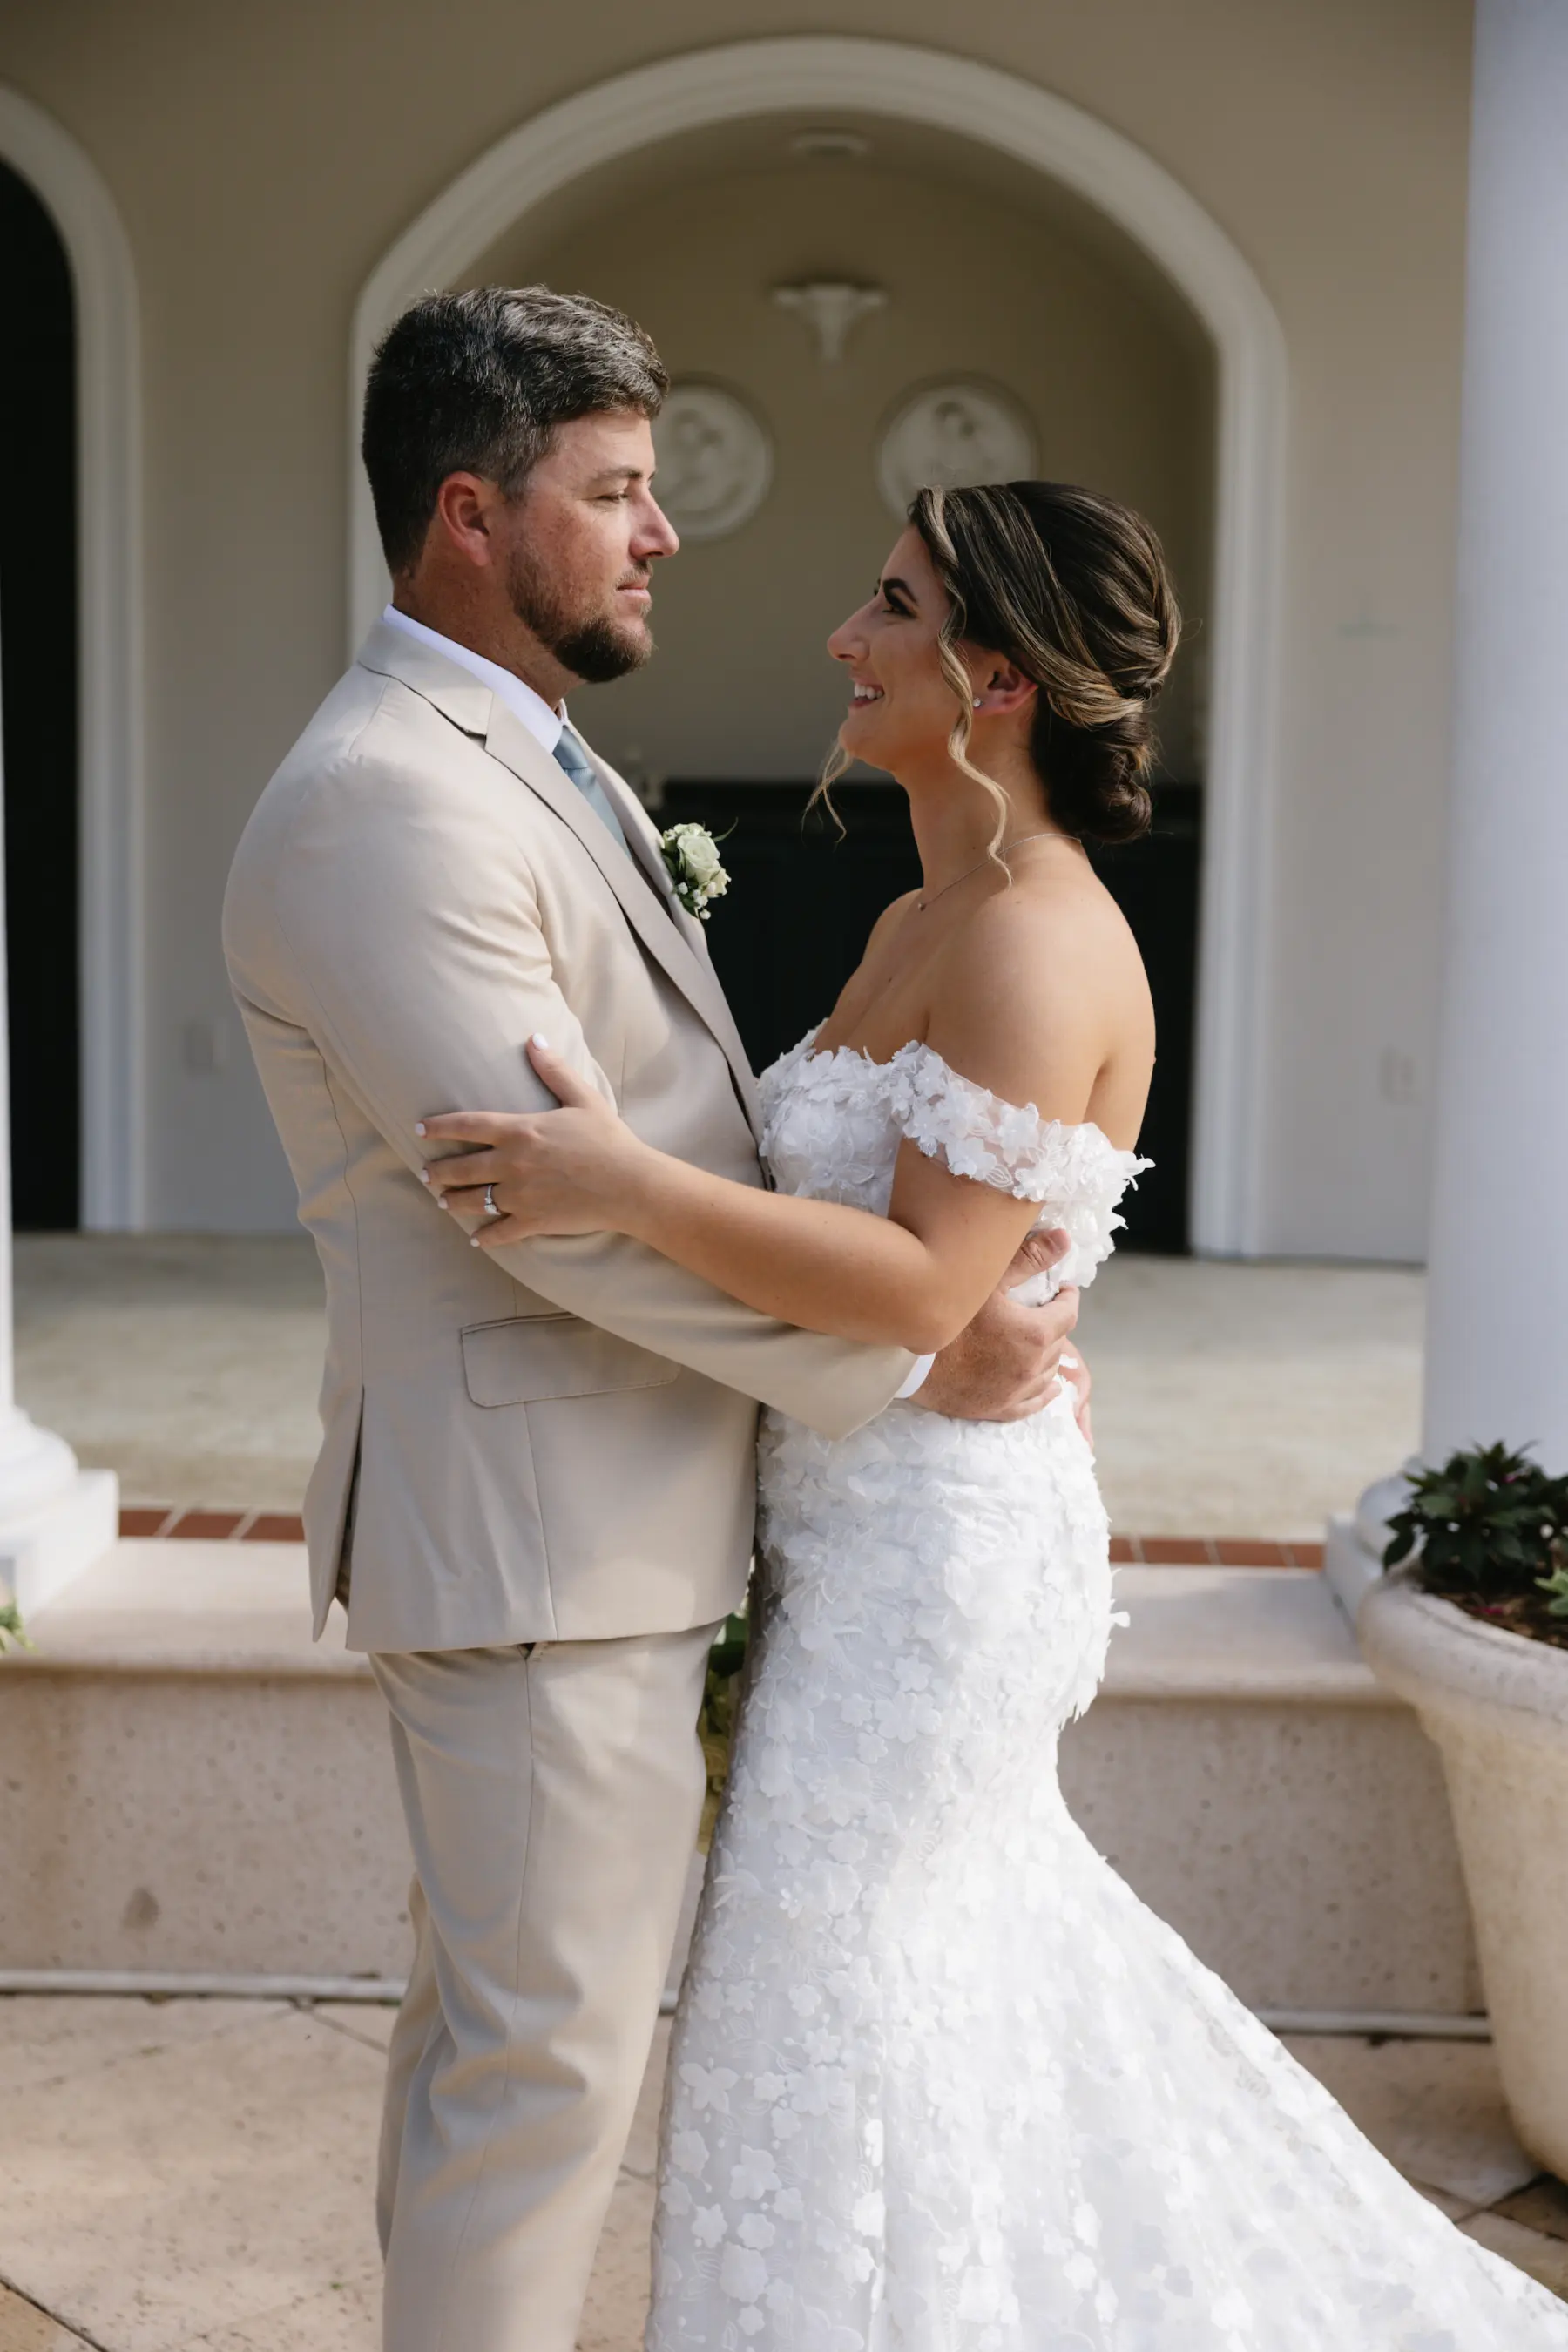 Bride and Groom First Look Wedding Portrait | Tampa Bay Photographer Arianna J Photography